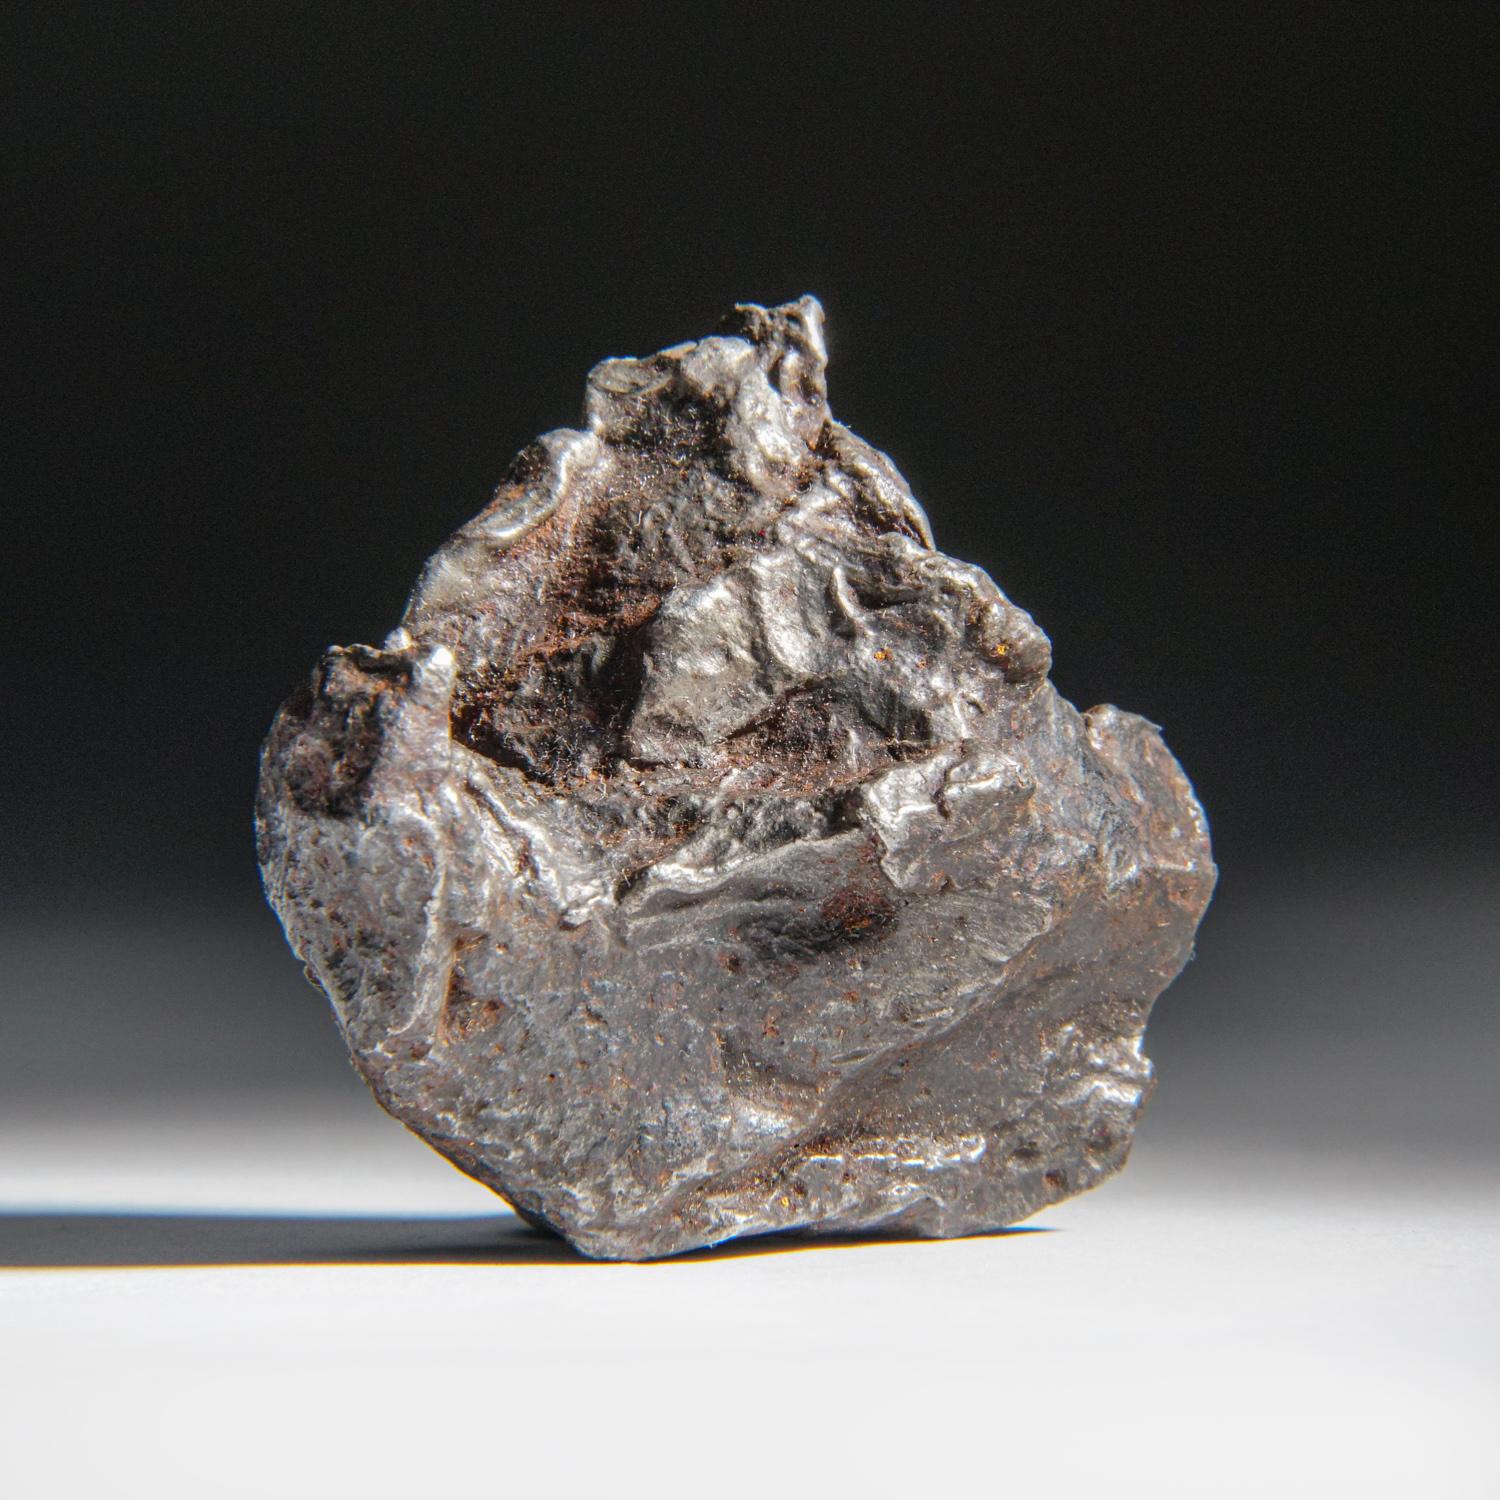 Contemporary Genuine Natural Sikhote-Alin Meteorite from Russia (108.6 grams)